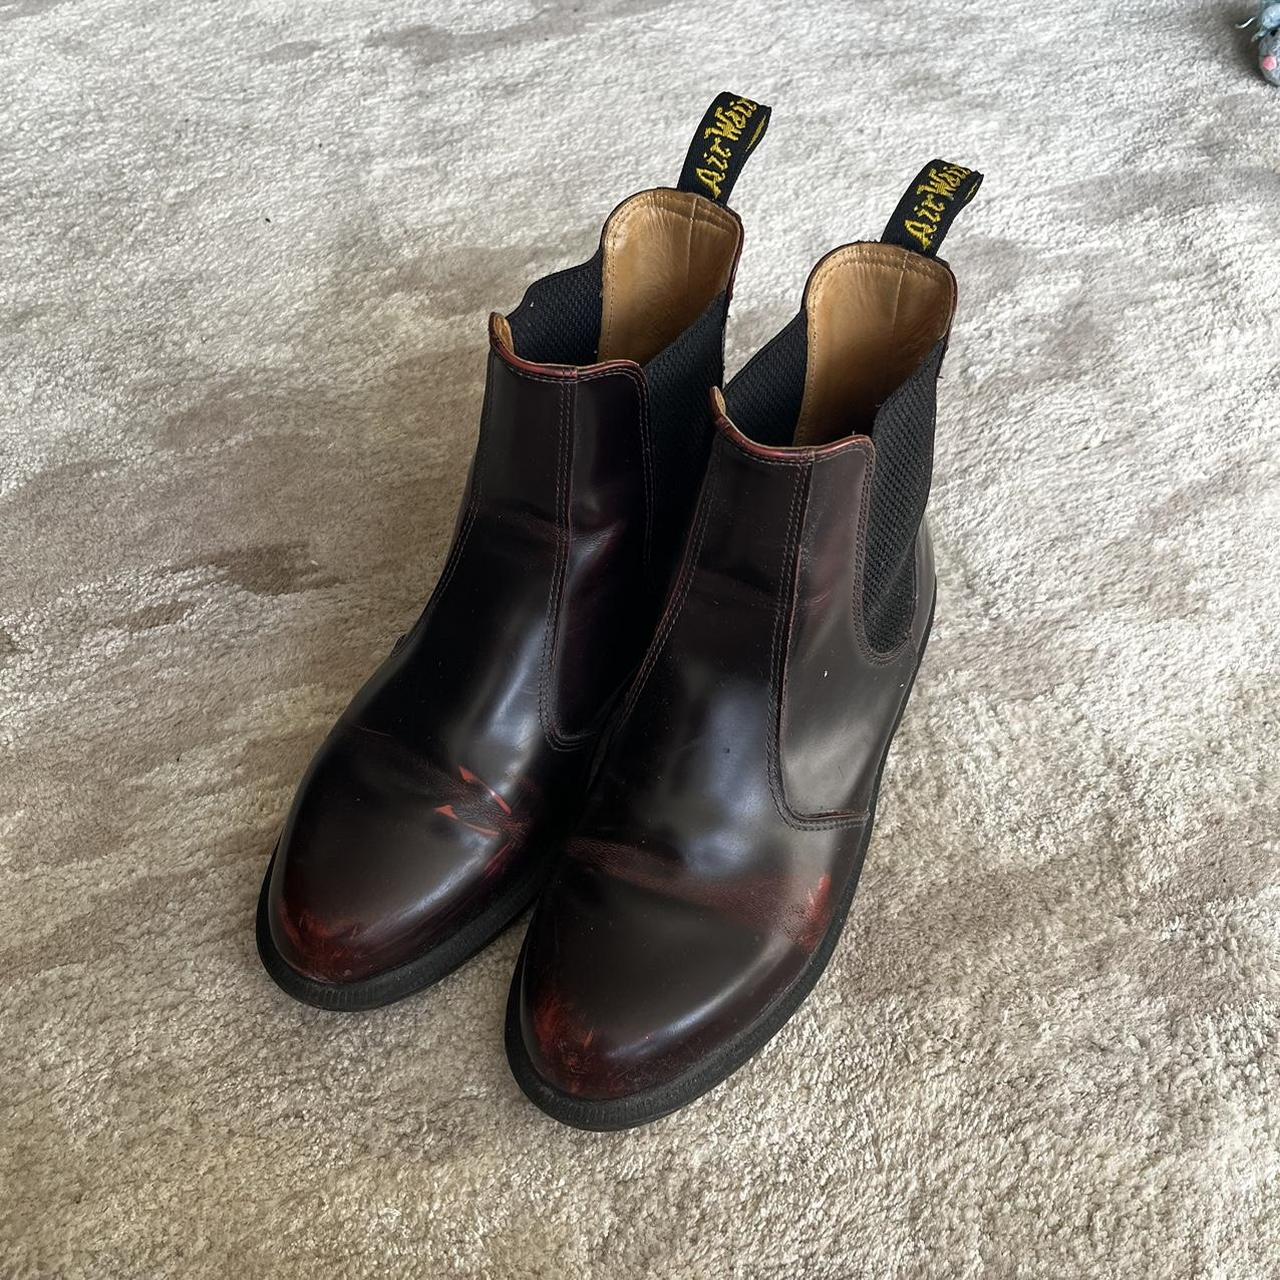 Dr. Martens Women's Brown and Red Boots